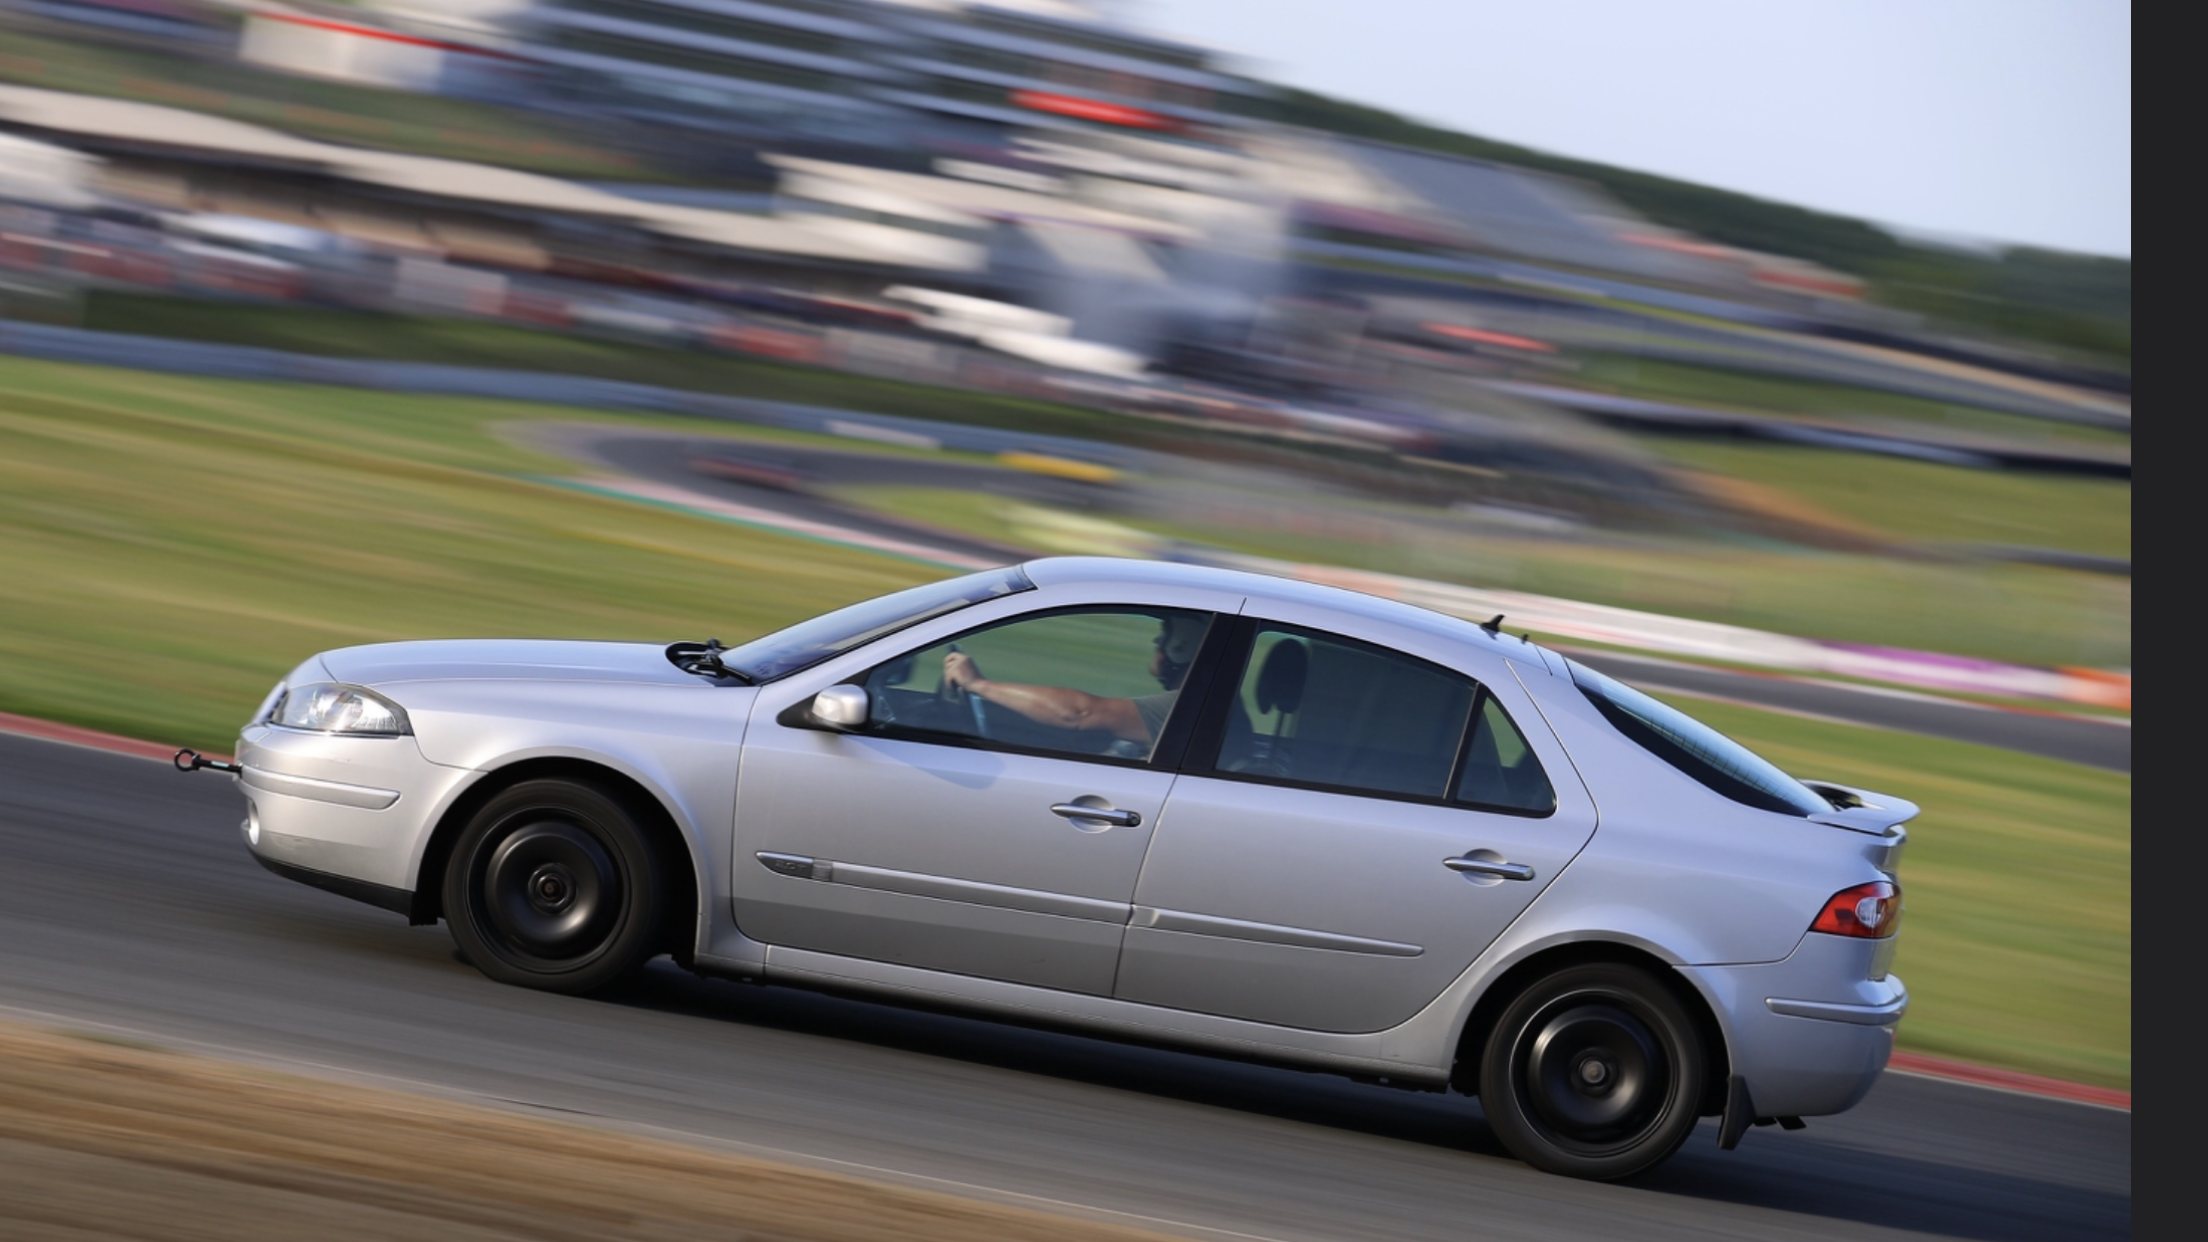 An odd track car - Renault Laguna  - Page 1 - Readers' Cars - PistonHeads